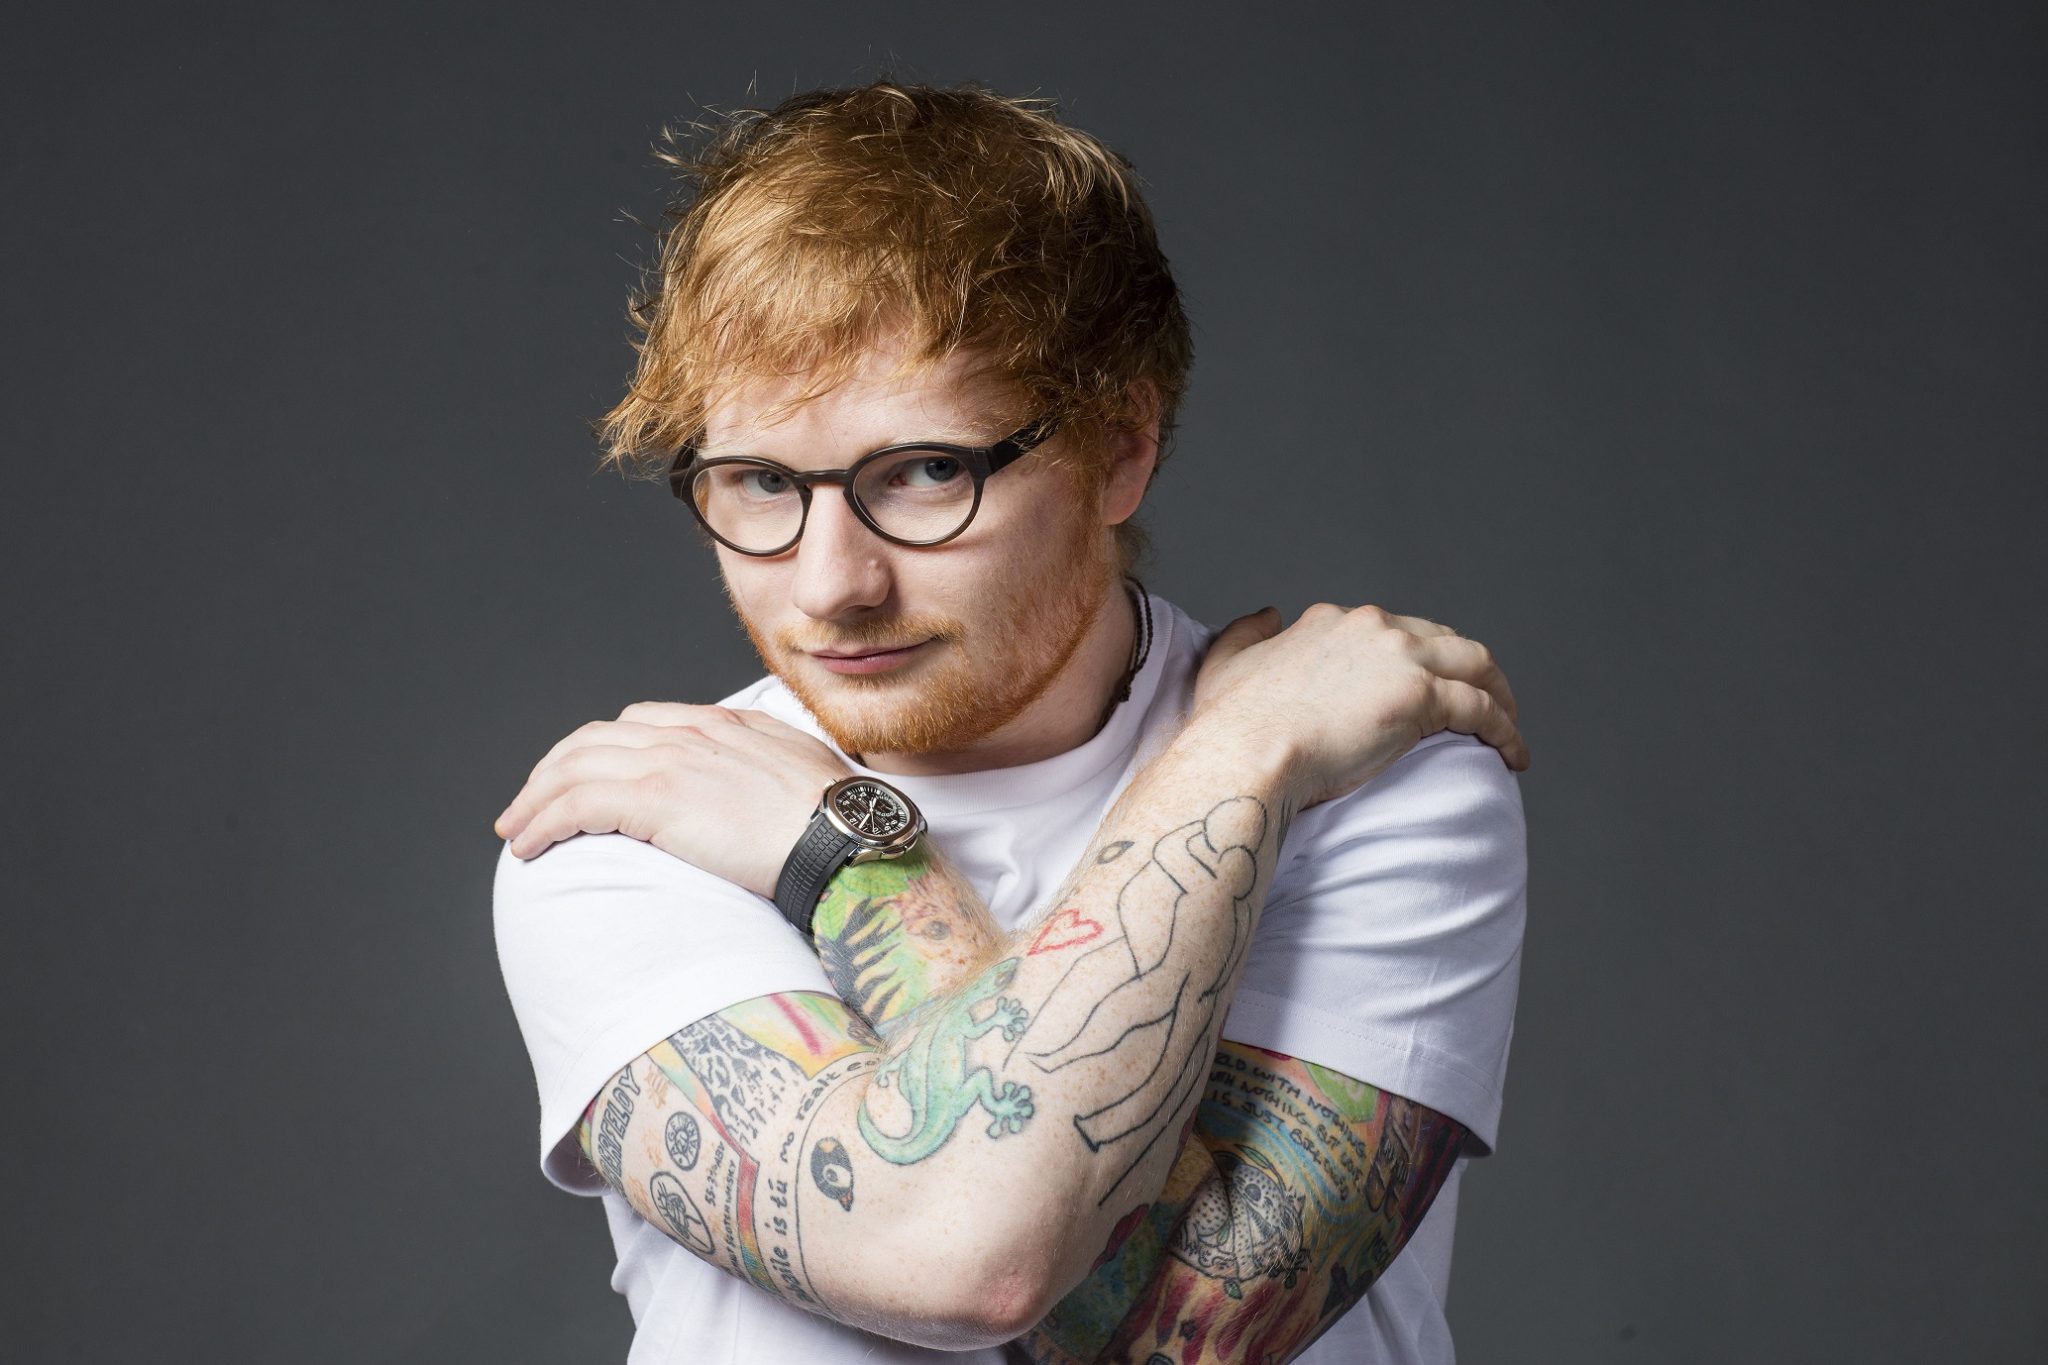 Ed Sheeran photographed in London. Sheeran is an English singer-songwriter, actor, guitarist and record producer. 
 
© David Levene / eyevine

Contact eyevine for more information about using this image:
T: +44 (0) 20 8709 8709
E: info@eyevine.com 
http:///www.eyevine.com  ***MIN 50 EURO***  *** Local Caption *** 01851588